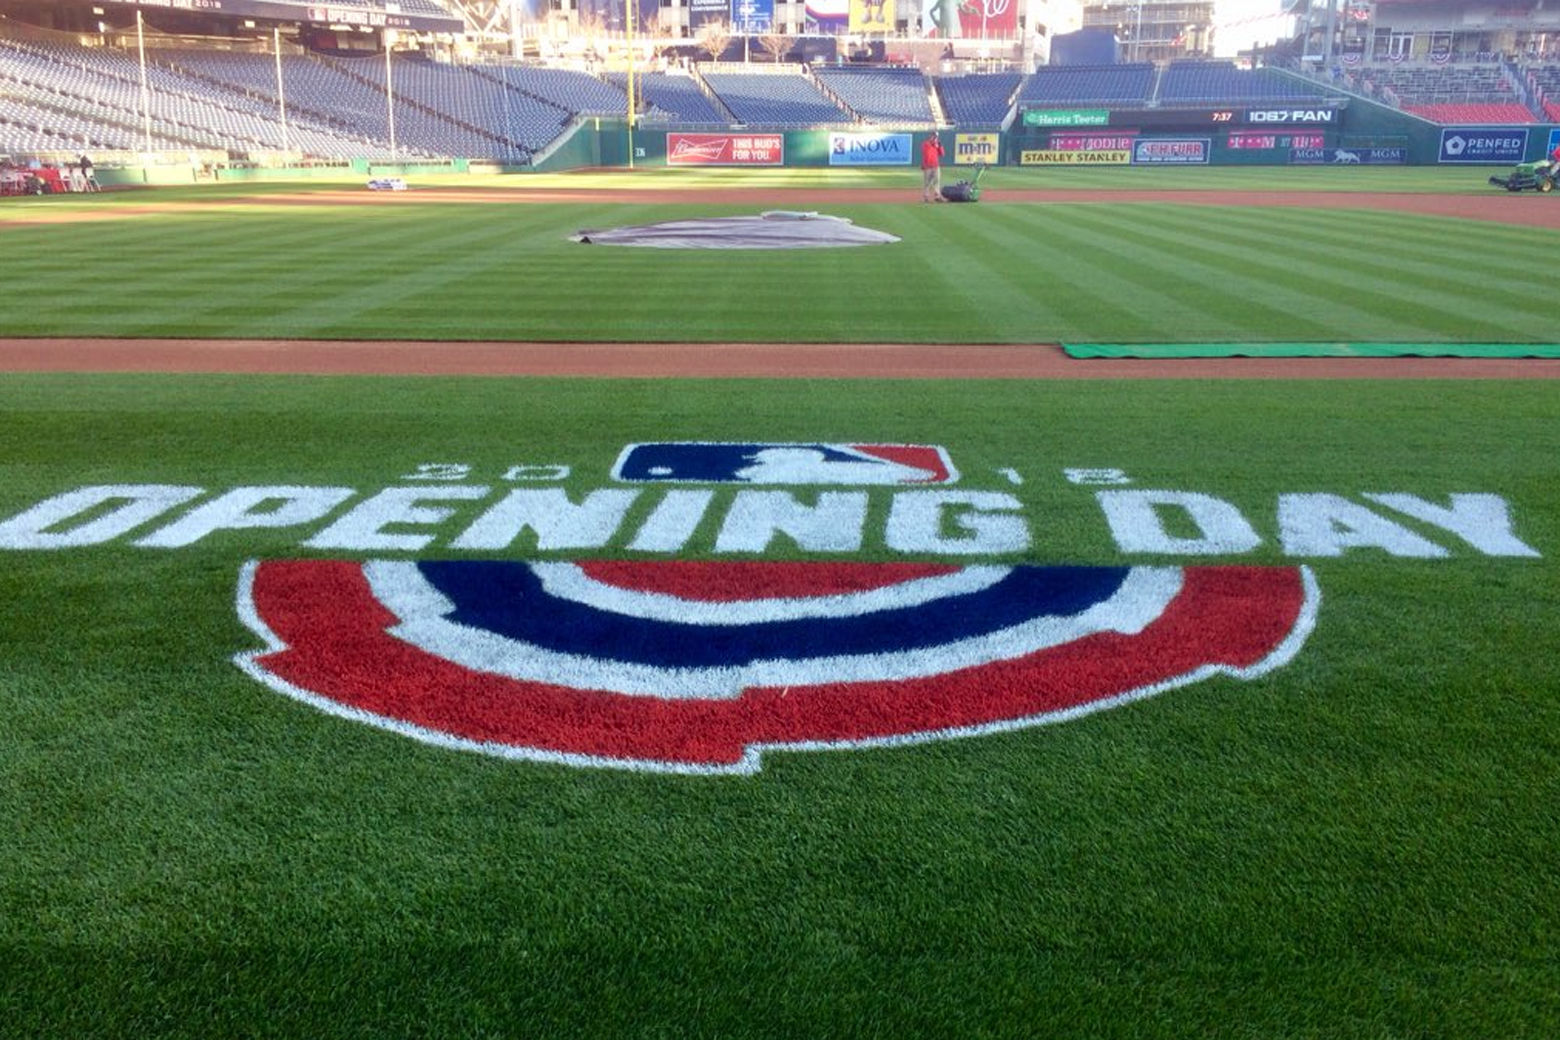 The field at Nationals Park looks pristine ahead of Thursday's home opener. (WTOP/Nick Iannelli)